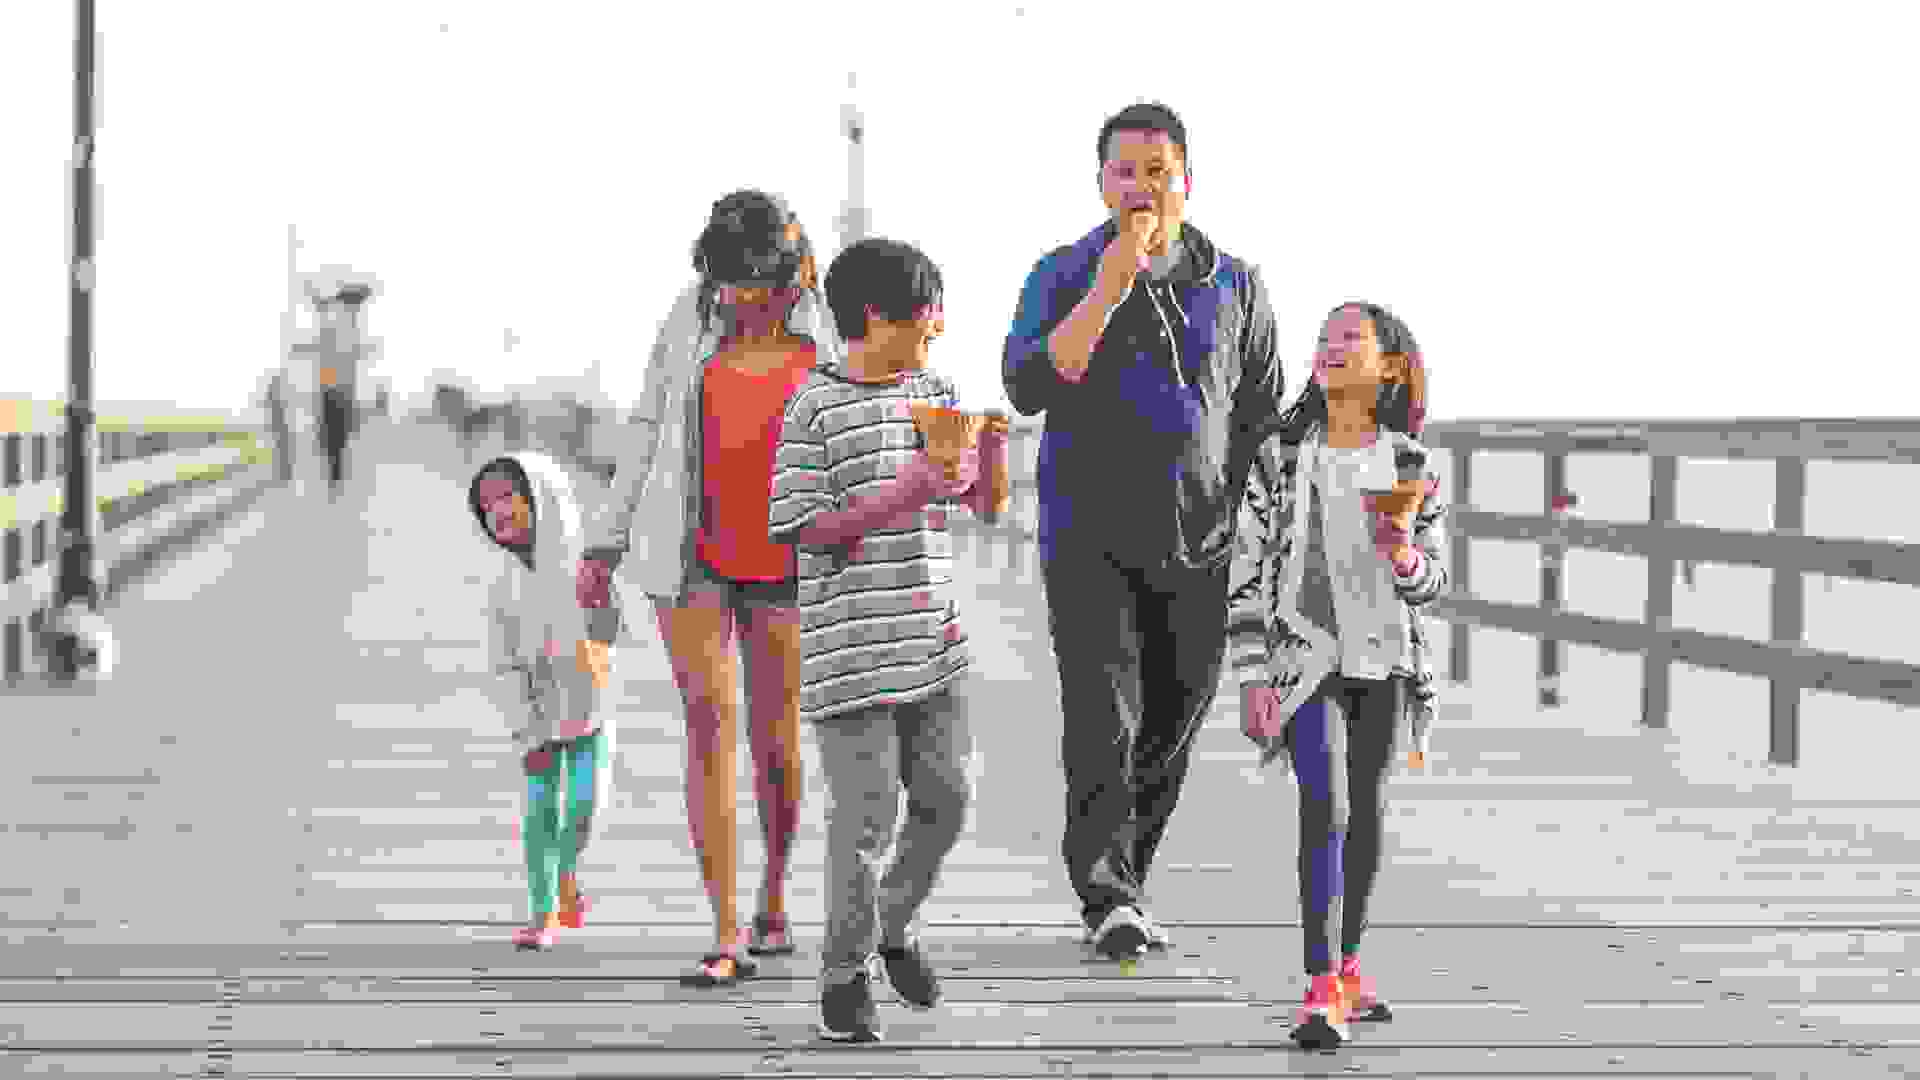 Two Filipino parents and their three children enjoy huge waffle ice cream cones on a California boardwalk by the beach.